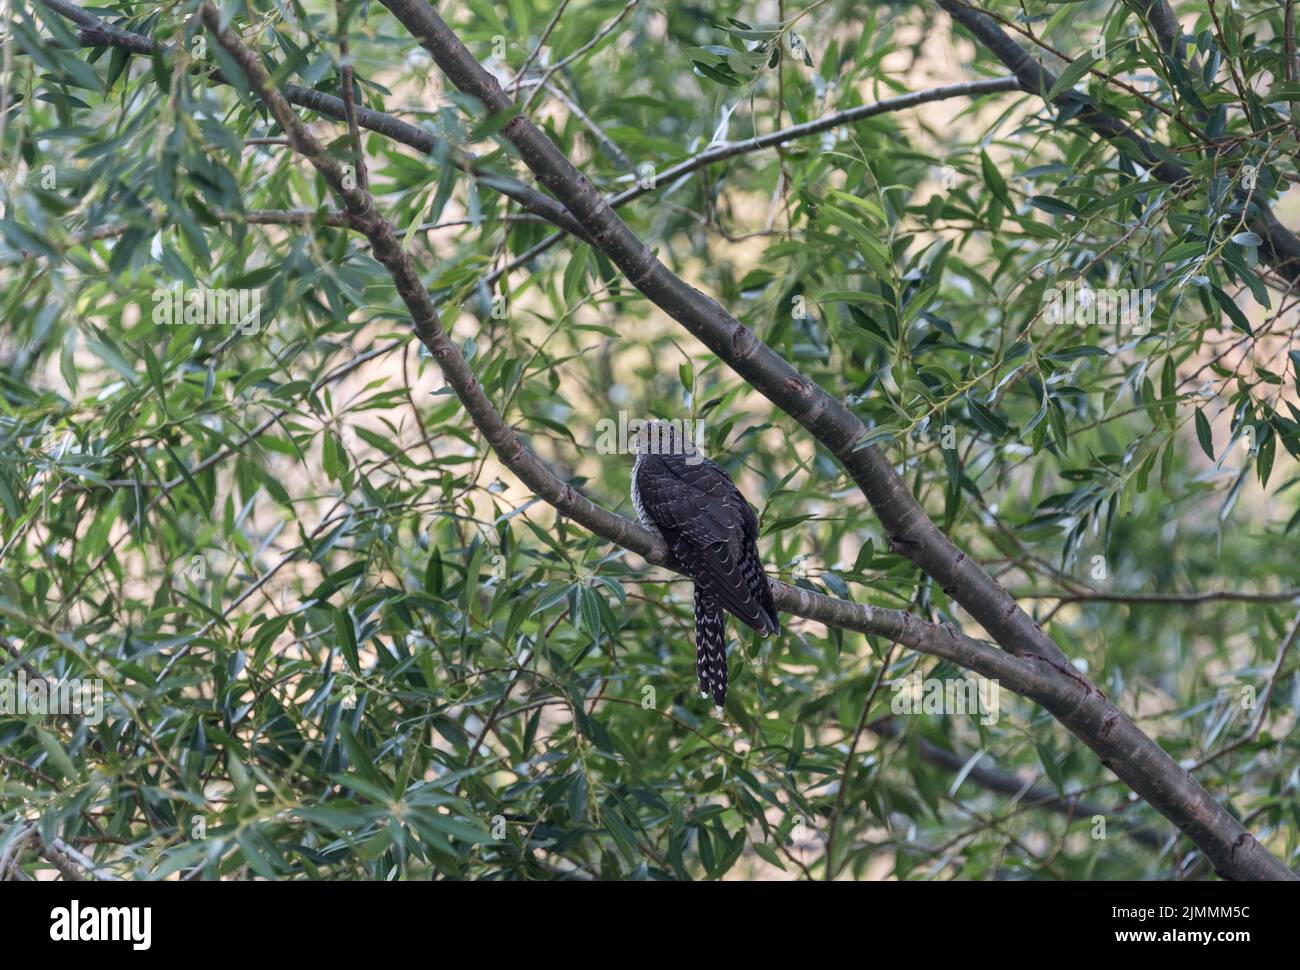 Juvenile Cuckoo (Cuculus canorus) perched in a tree Stock Photo